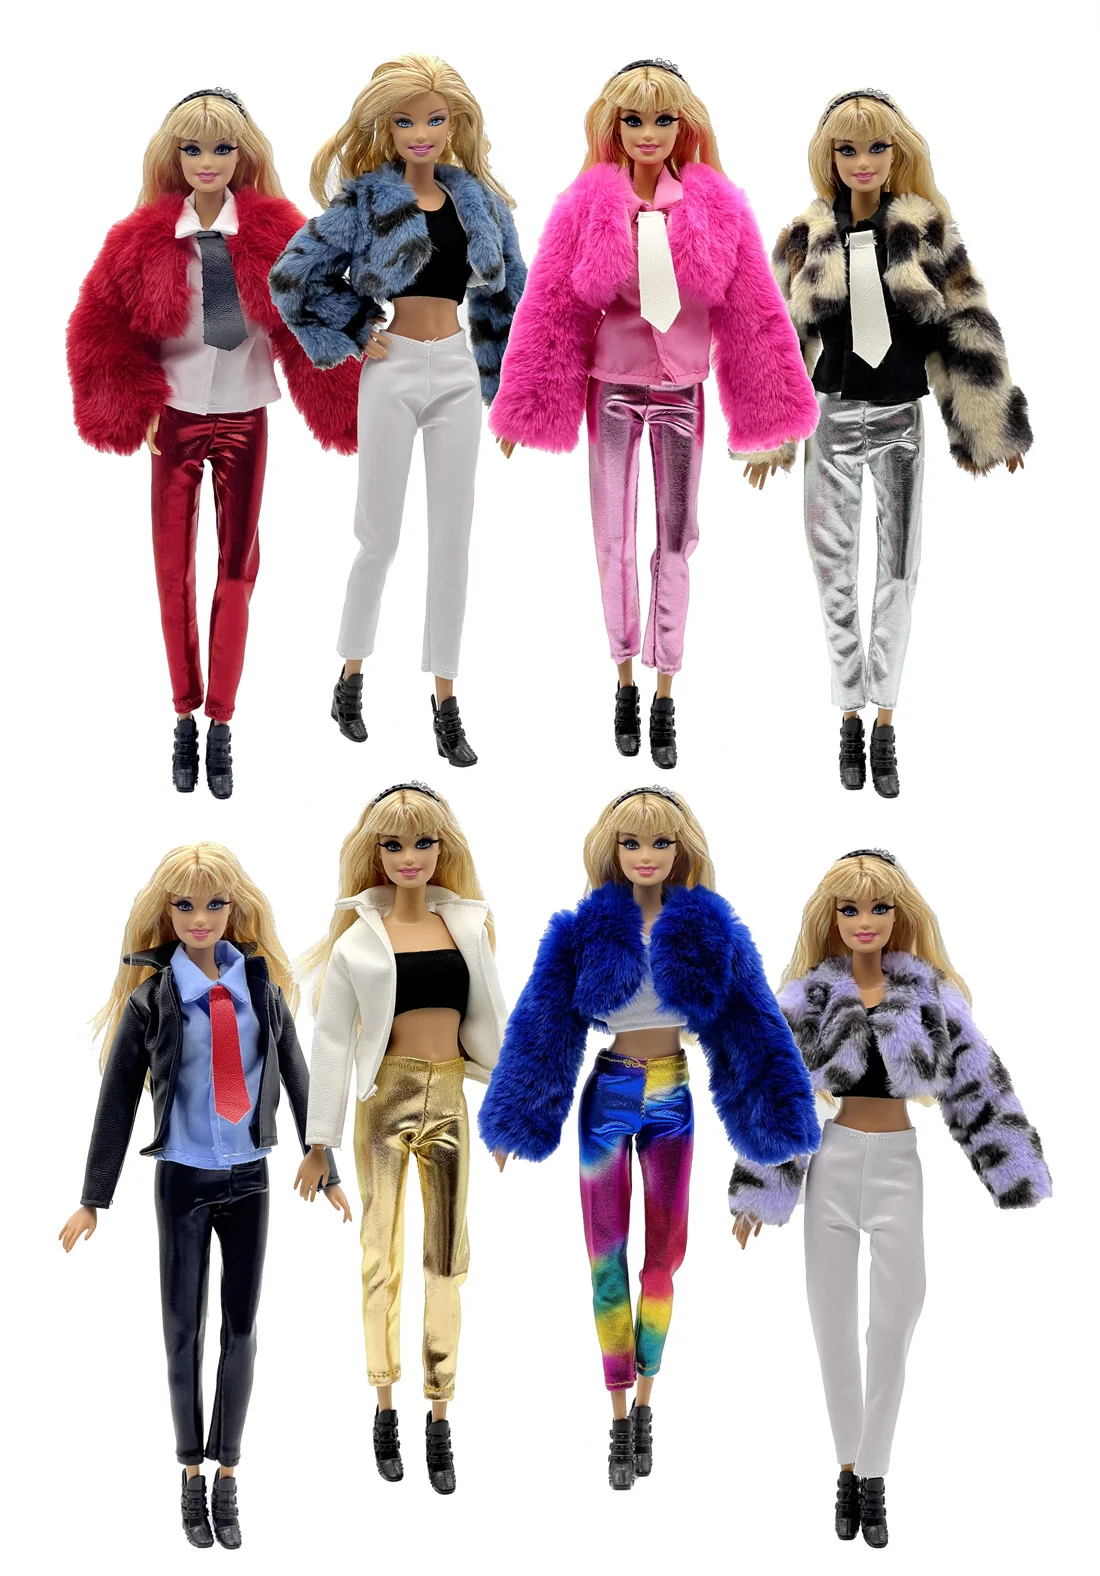 

1 Set Cloth Doll Accessories Uniforms Casual Wear Cool Set Clothes for 30cm 11 Inch Barbie Doll Kids or Birthday GiftE2